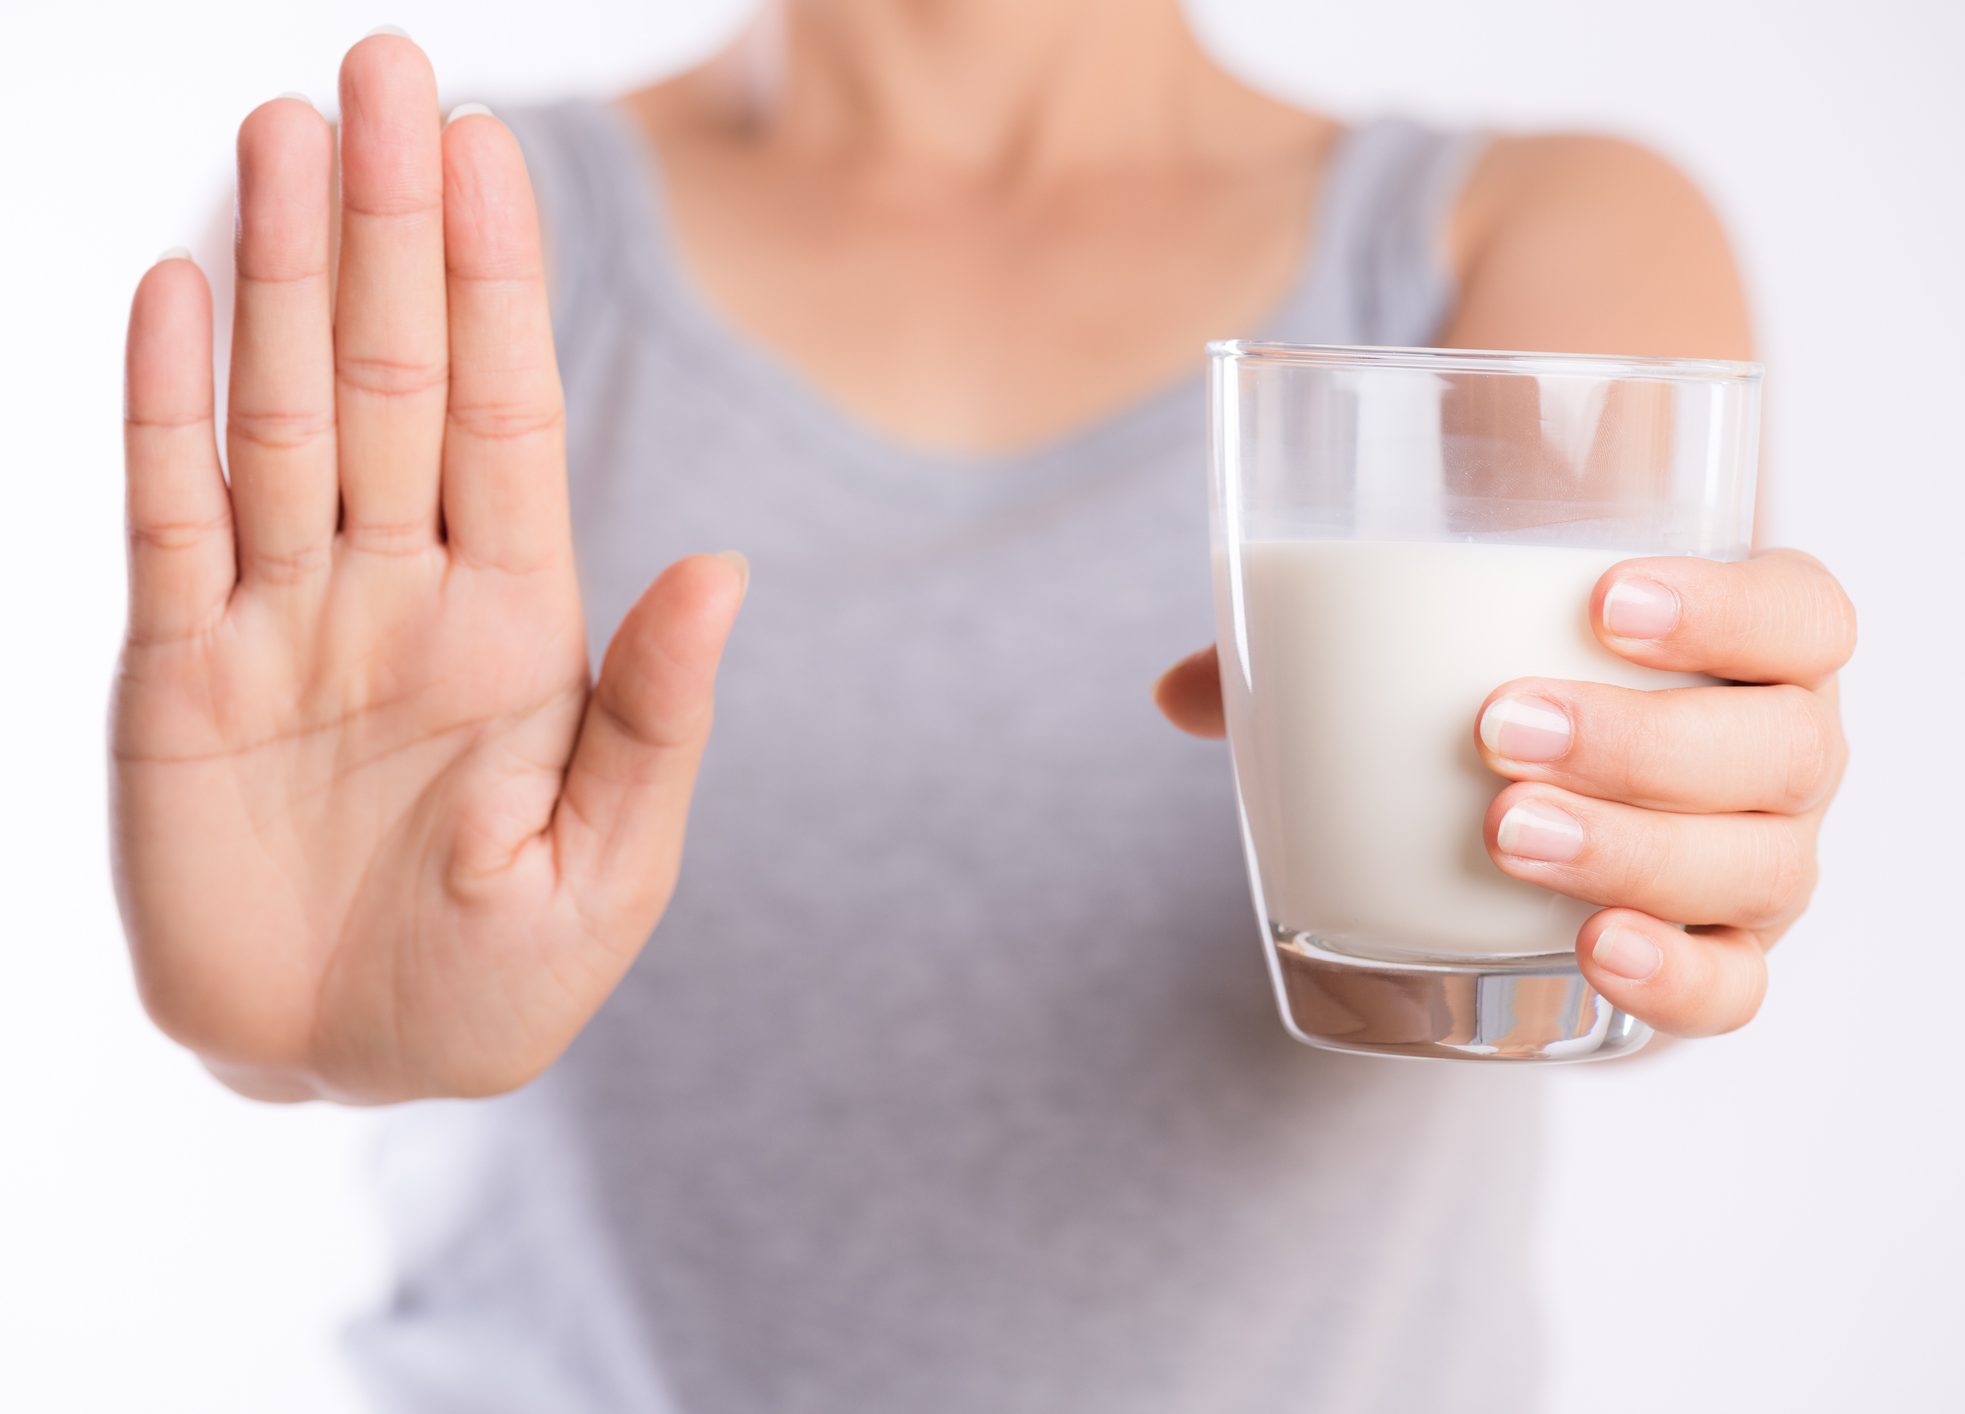 FUNIBER-woman-hand-holding-glass-of-milk-having-bad-stomach-ache-because-of-lactose-intolerance-and-another-hand-shows-stop-sign-health-problem-with-dairy-food-products-healthcare-and-medical-concept-